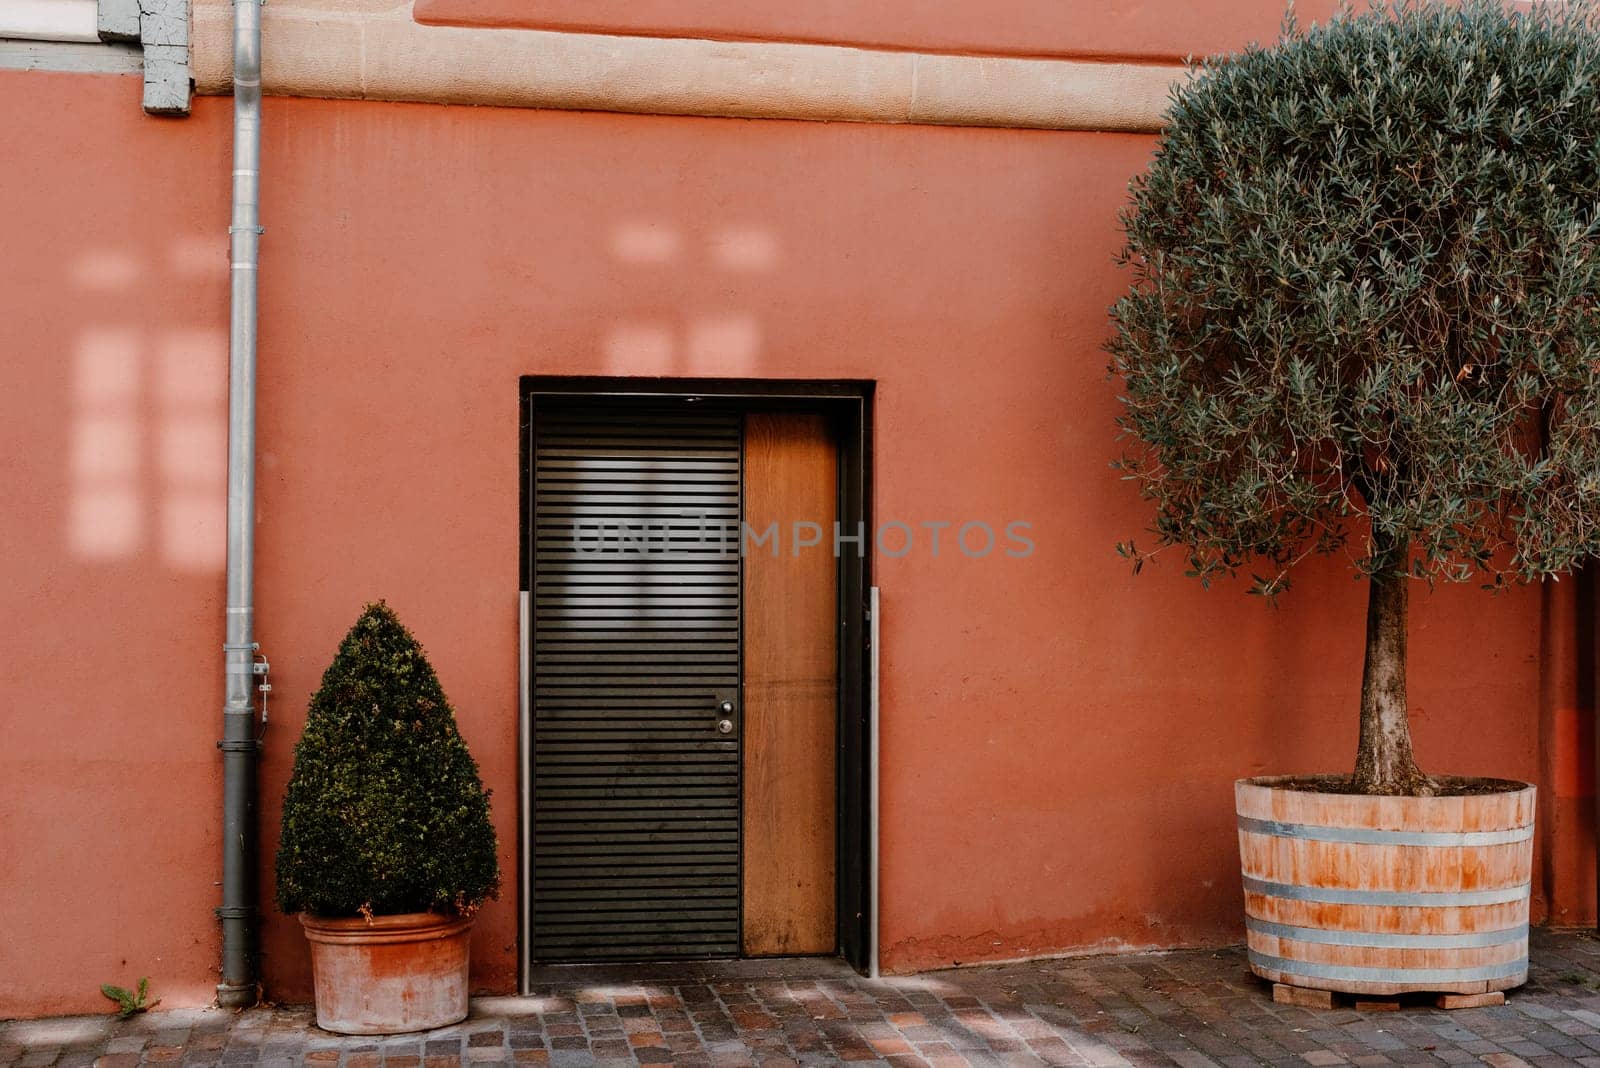 Facade of a modern house with a gray front door and potted flowers. Old historic Italian architecture. Traditional European old town building. Blue wooden door, balcony, blooming bush, pastel walls with sunlight shadows. Aesthetic summer vacation travel background